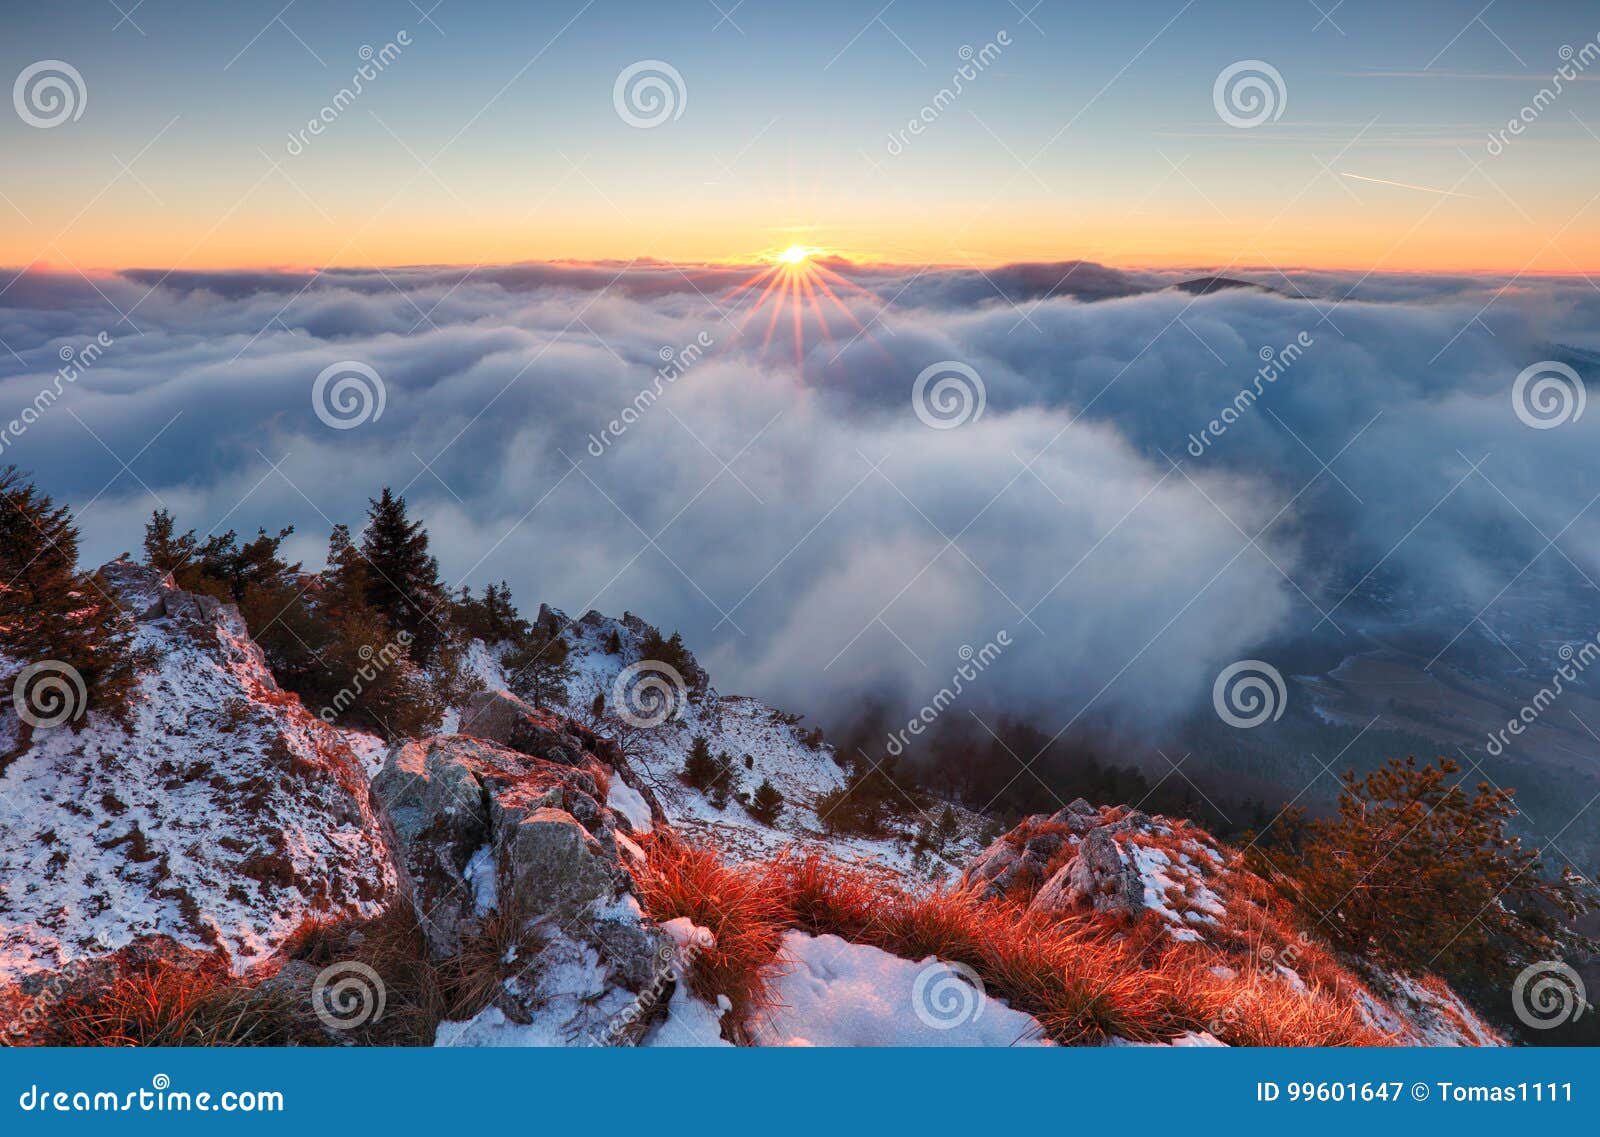 above clouds in winter - mountain landcape at sunset, slovakia